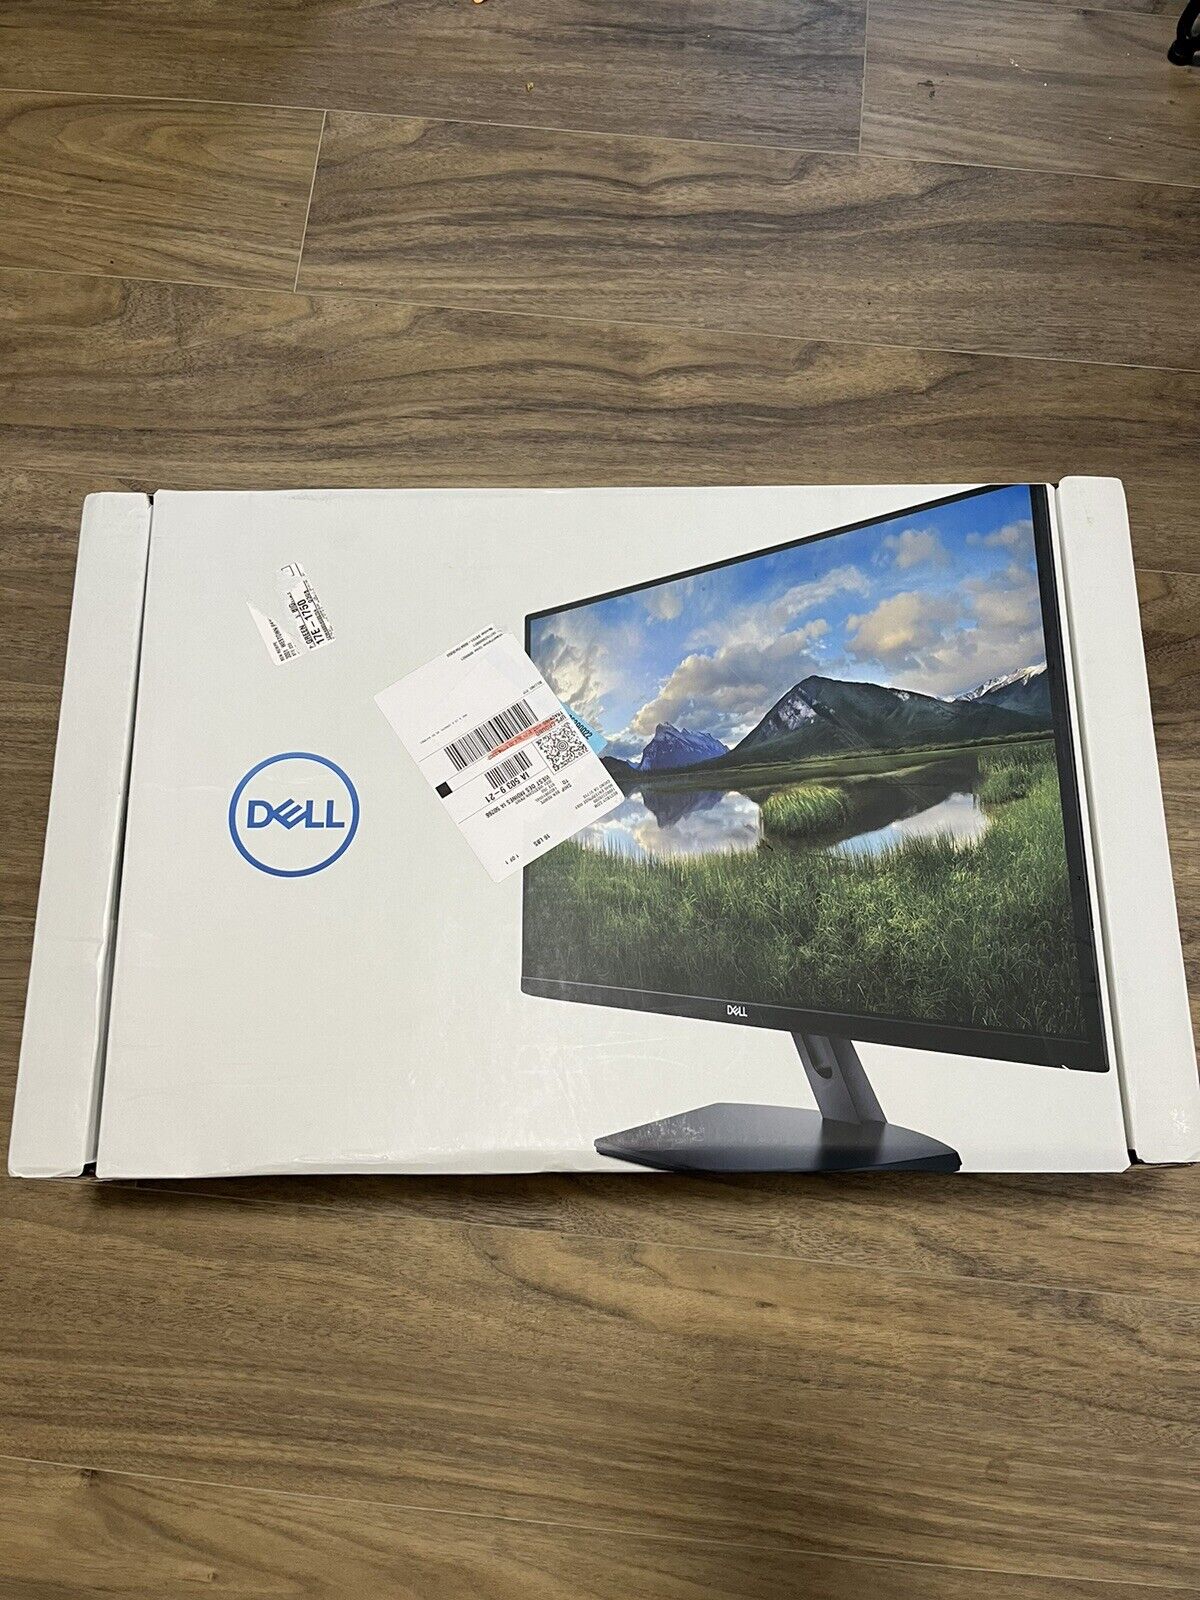 Dell SE2719HR 27 inch Widescreen IPS LCD Monitor - Sealed In Box